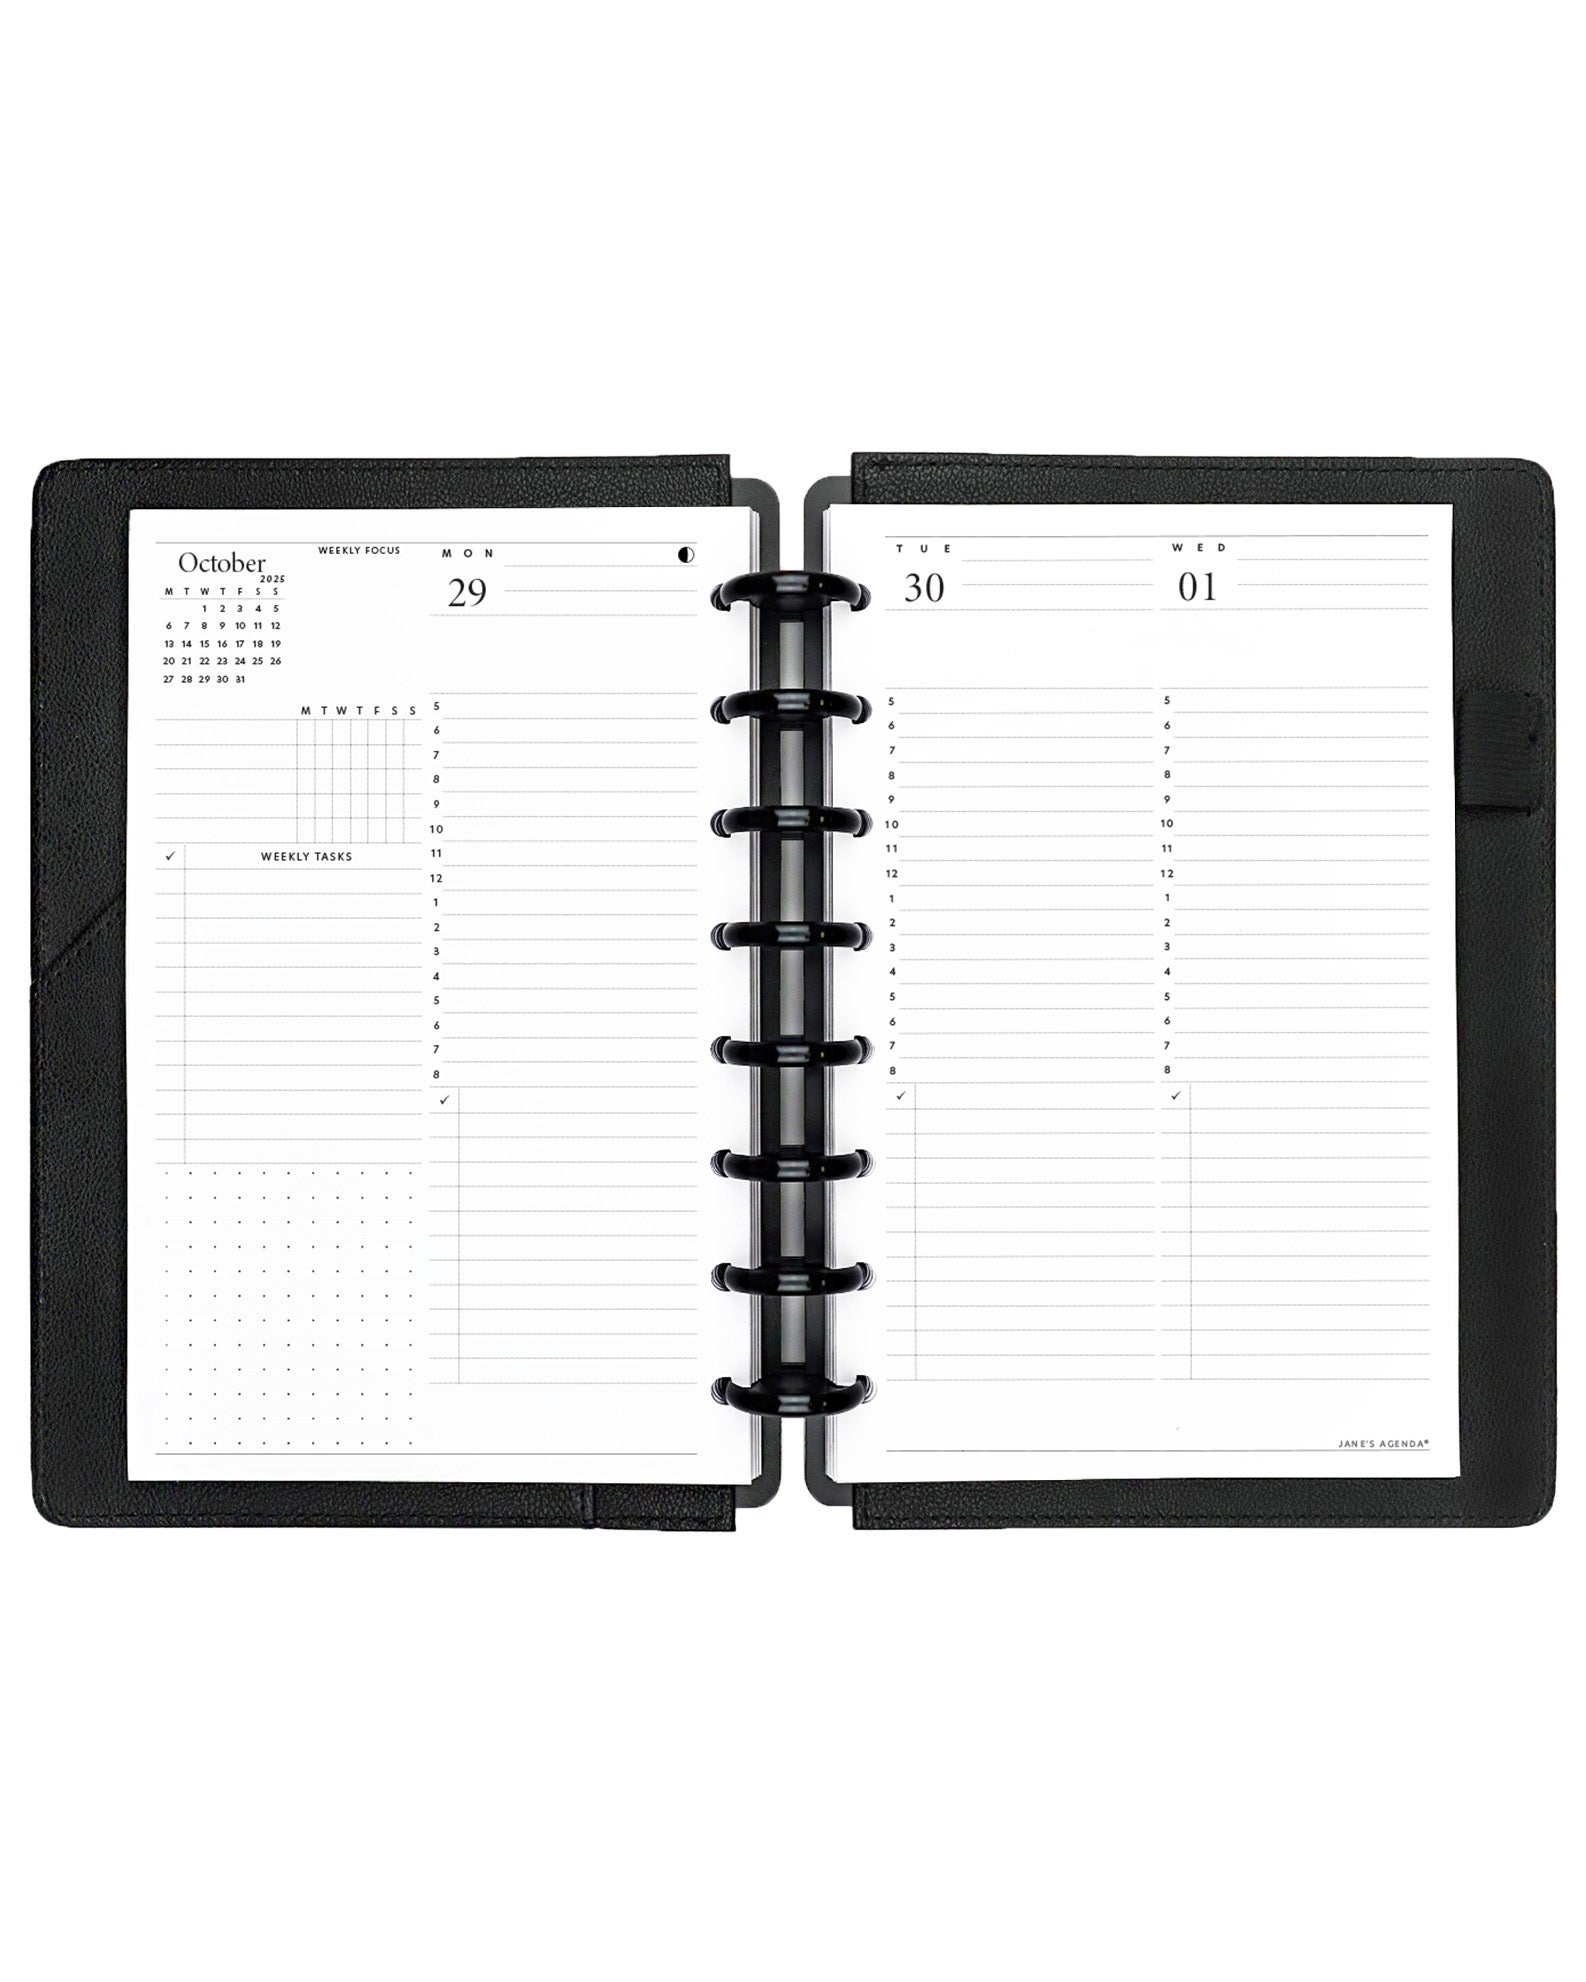 Financial Planning Planner Refill Pages | Jane's Agenda®